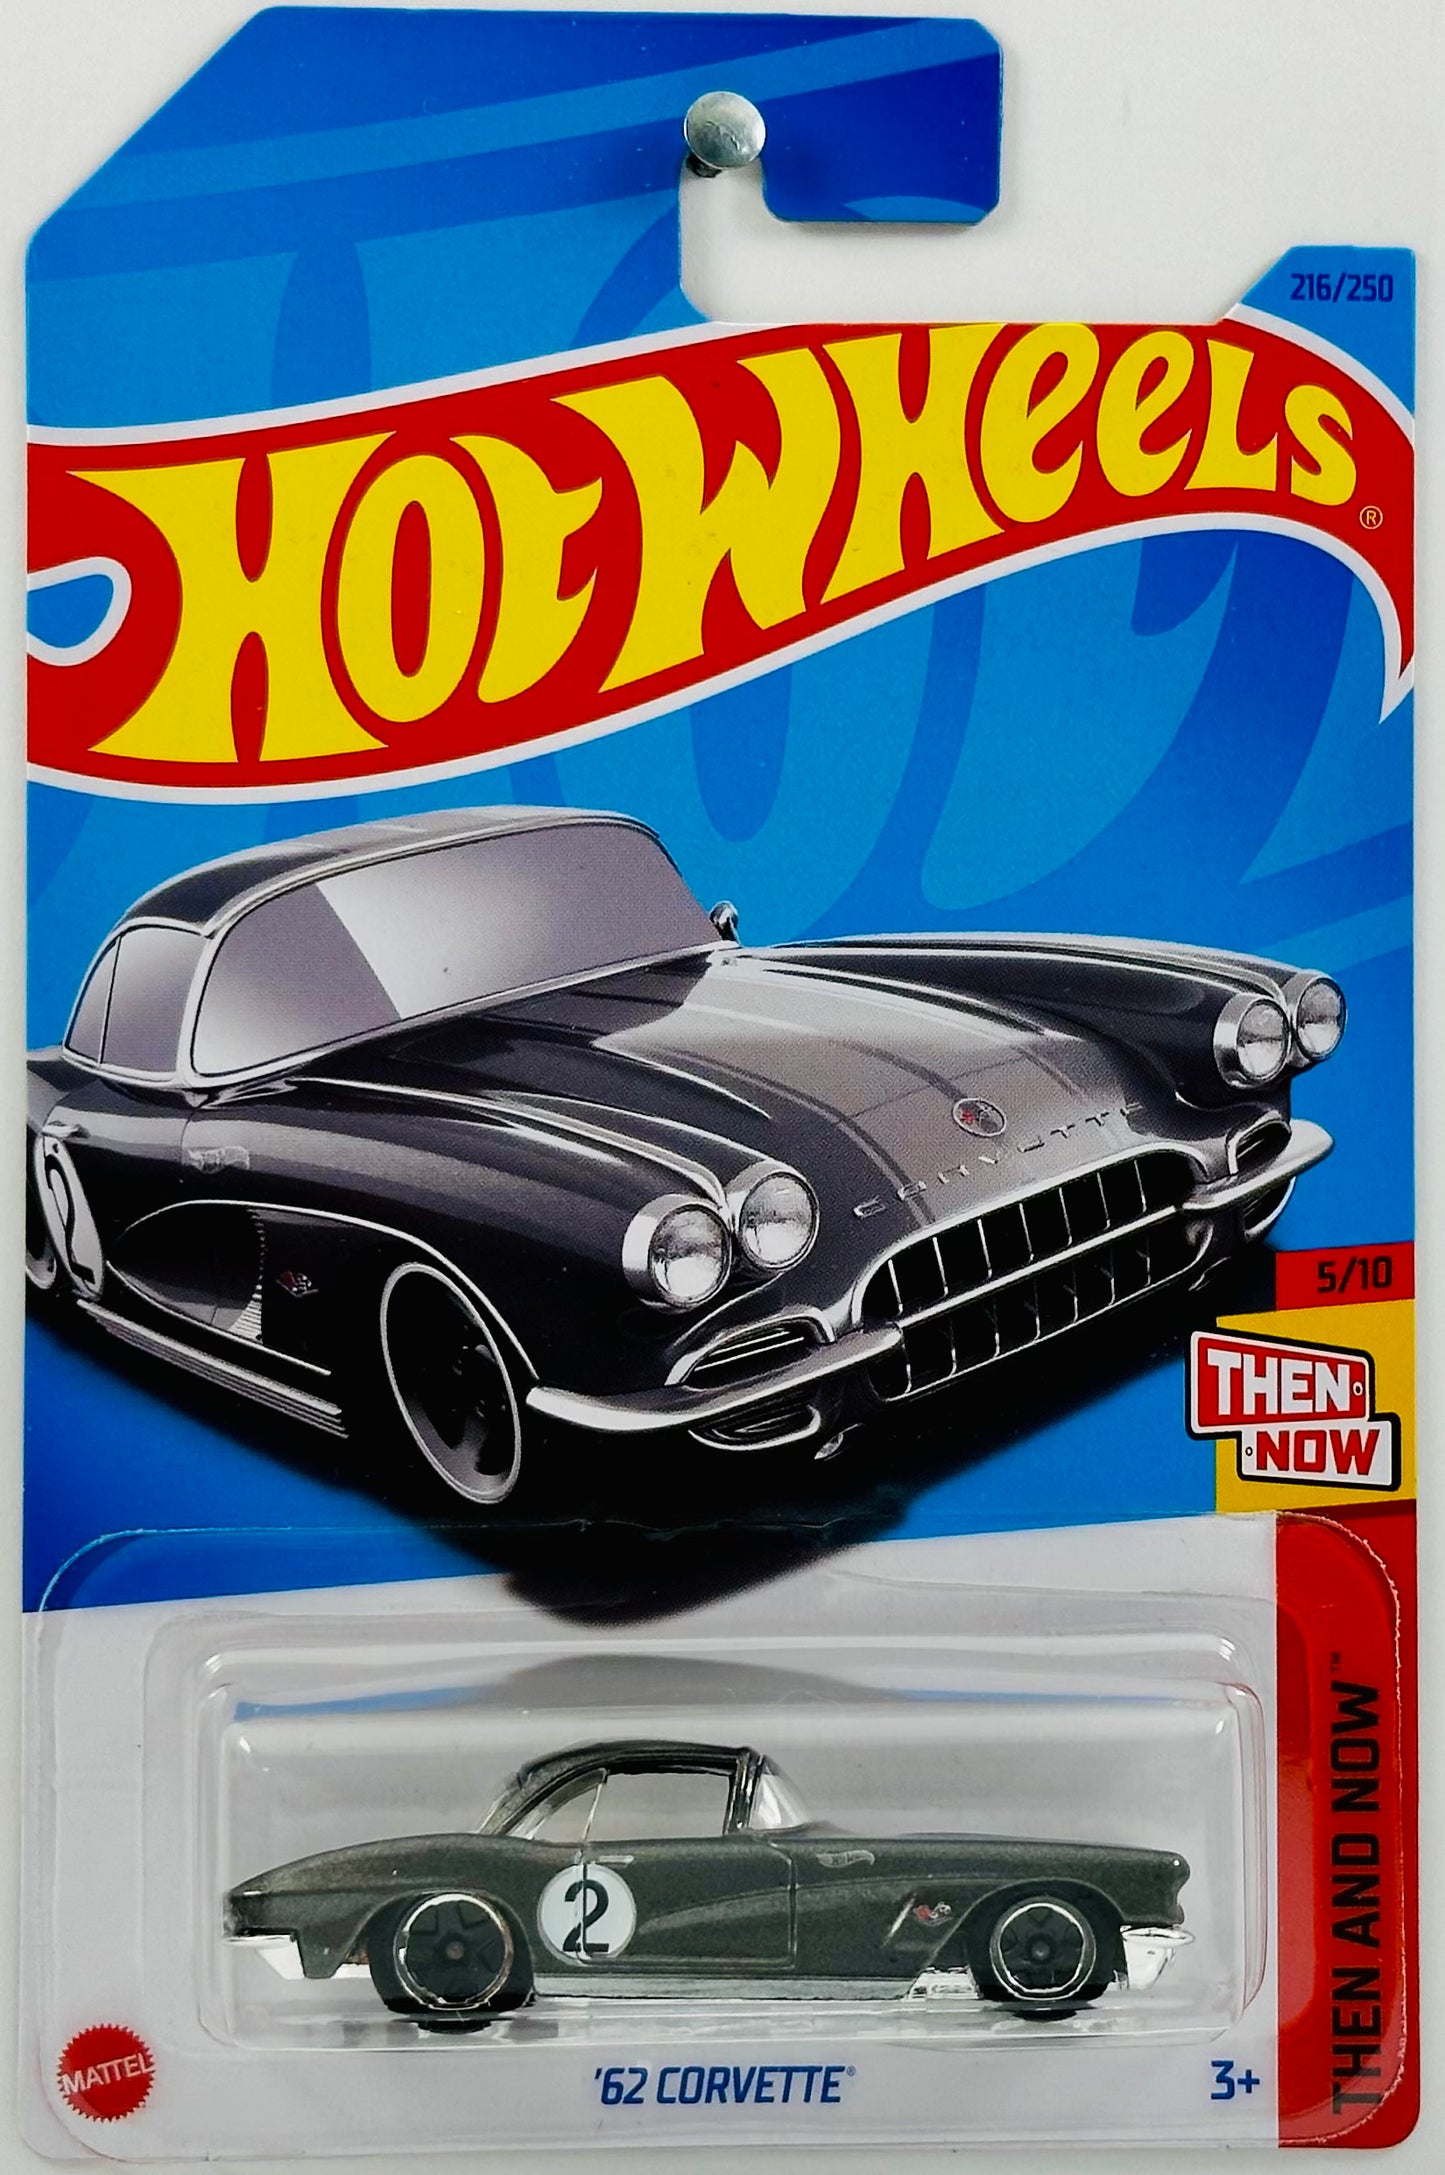 Hot Wheels 2023 - Collector # 216/250 - Then And Now 05/10 - '62 Corvette - Metalflake Gray - IC